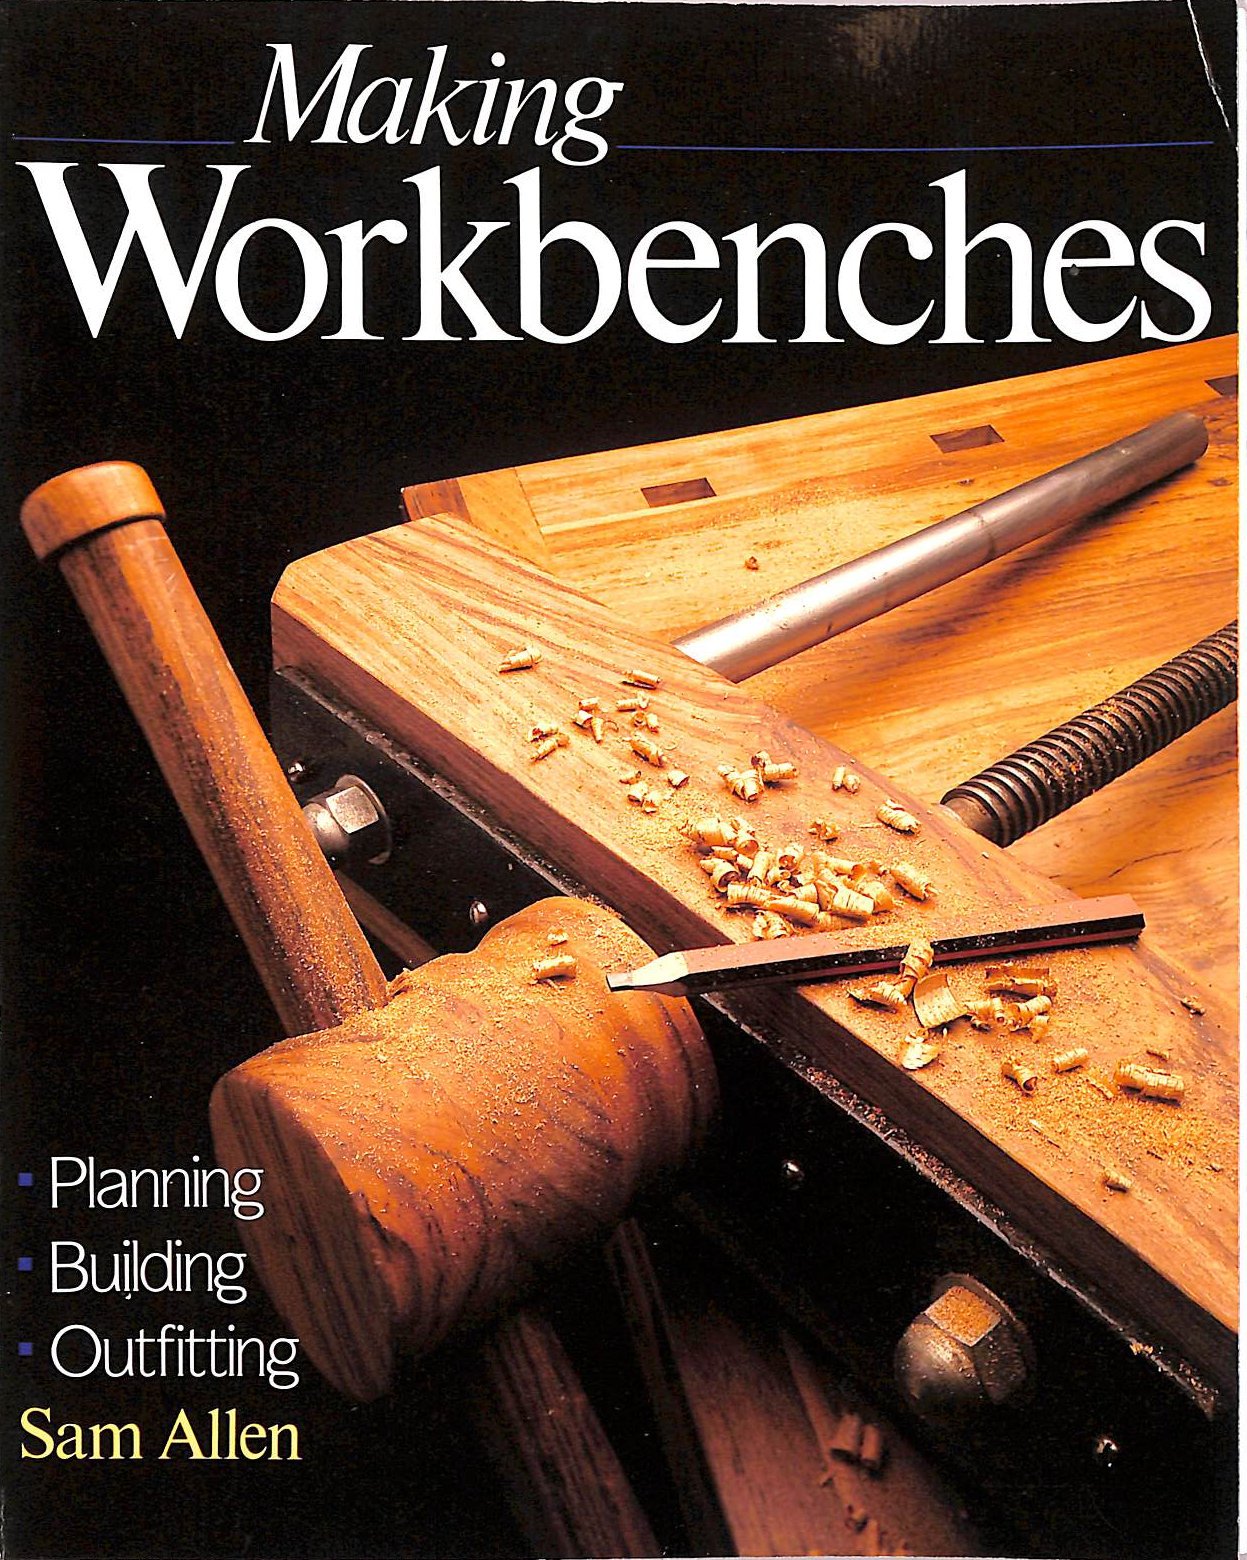 ALLEN, SAM - Making Workbenches: Planning, Building, Outfitting